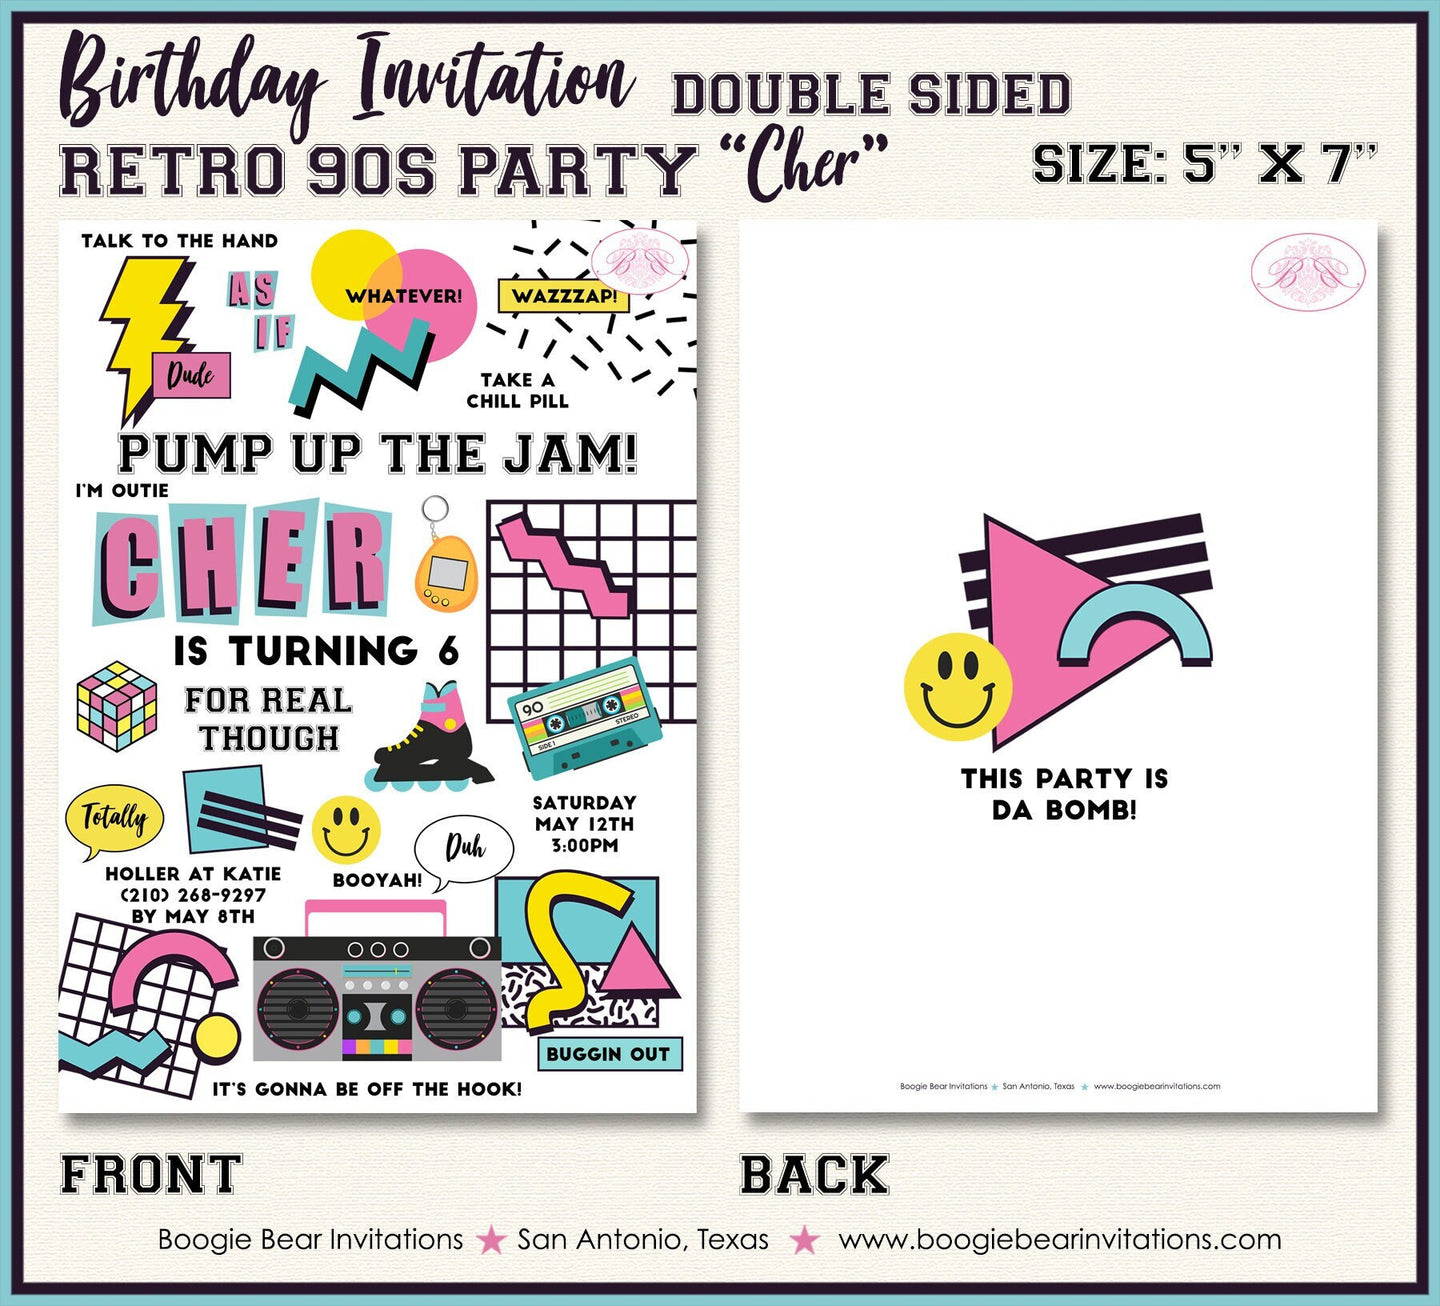 Retro 90s Birthday Party Invitation 1990s Girl Y2K Disco Dance As If Boogie Bear Invitations Cher Theme Paperless Printable Printed